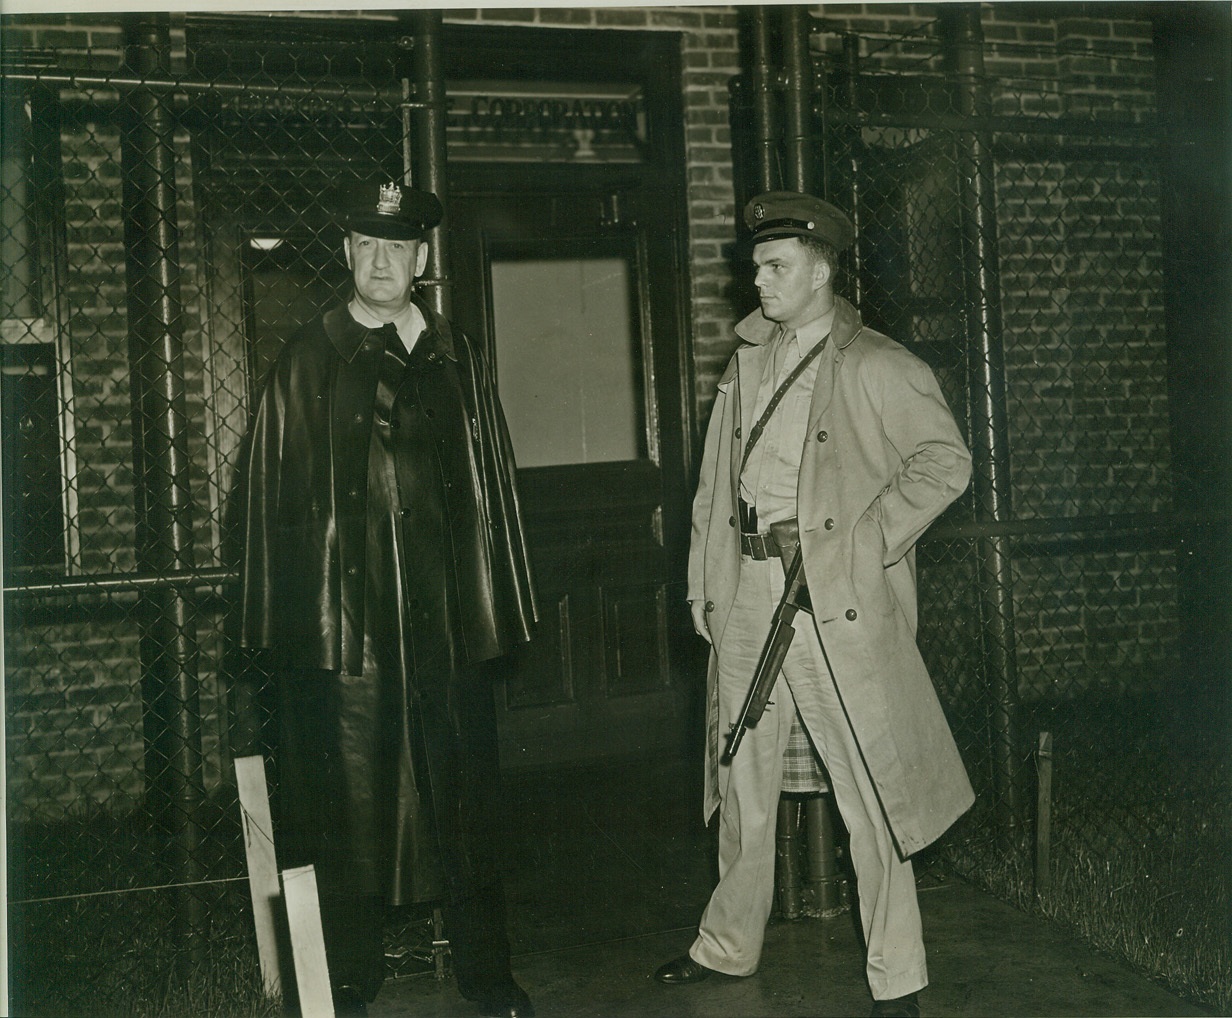 War Plant Closed by President, 8/13/1942. Bayonne, N.J.—Sgt. Charles Robinson, (left), of the Bayonne Police, and Pvt. John Glowacki, at the entrance to the General Cable Co. Plant on West First Street in Bayonne. Pvt. Glowacki accompanied Army officials, who visited the plant after President Roosevelt’s order that the Navy take over the plant had been announced. The factory manufactures cables for the Armed Forces. Credit: ACME.;